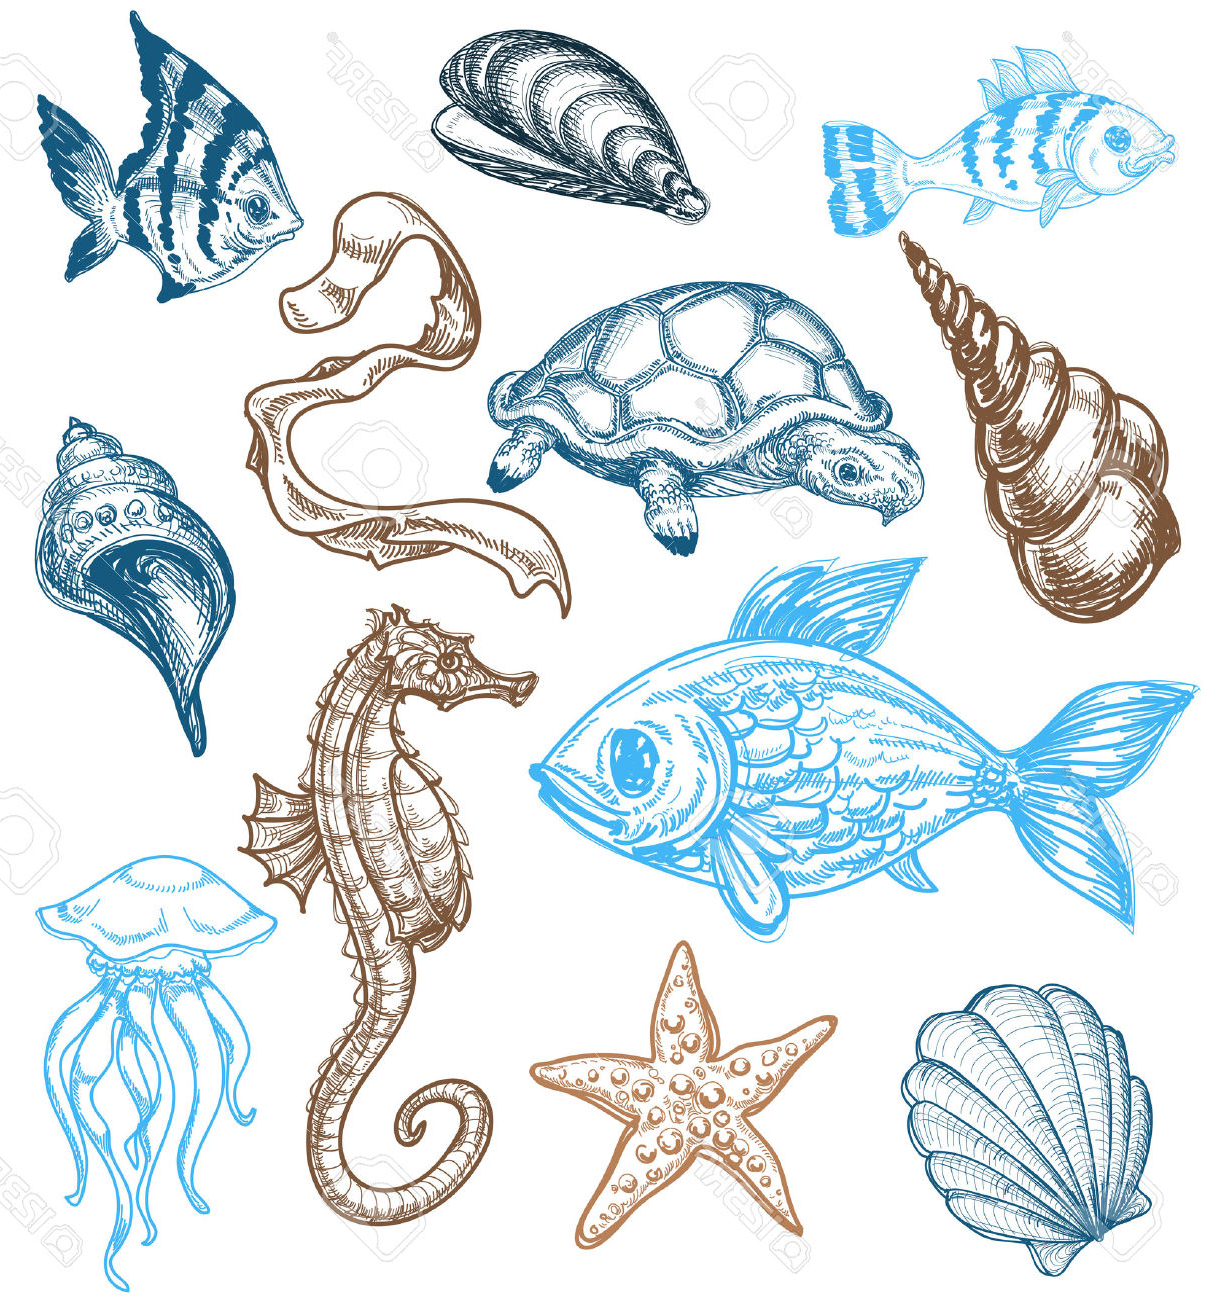 Sea Life Sketches at PaintingValley.com | Explore collection of Sea